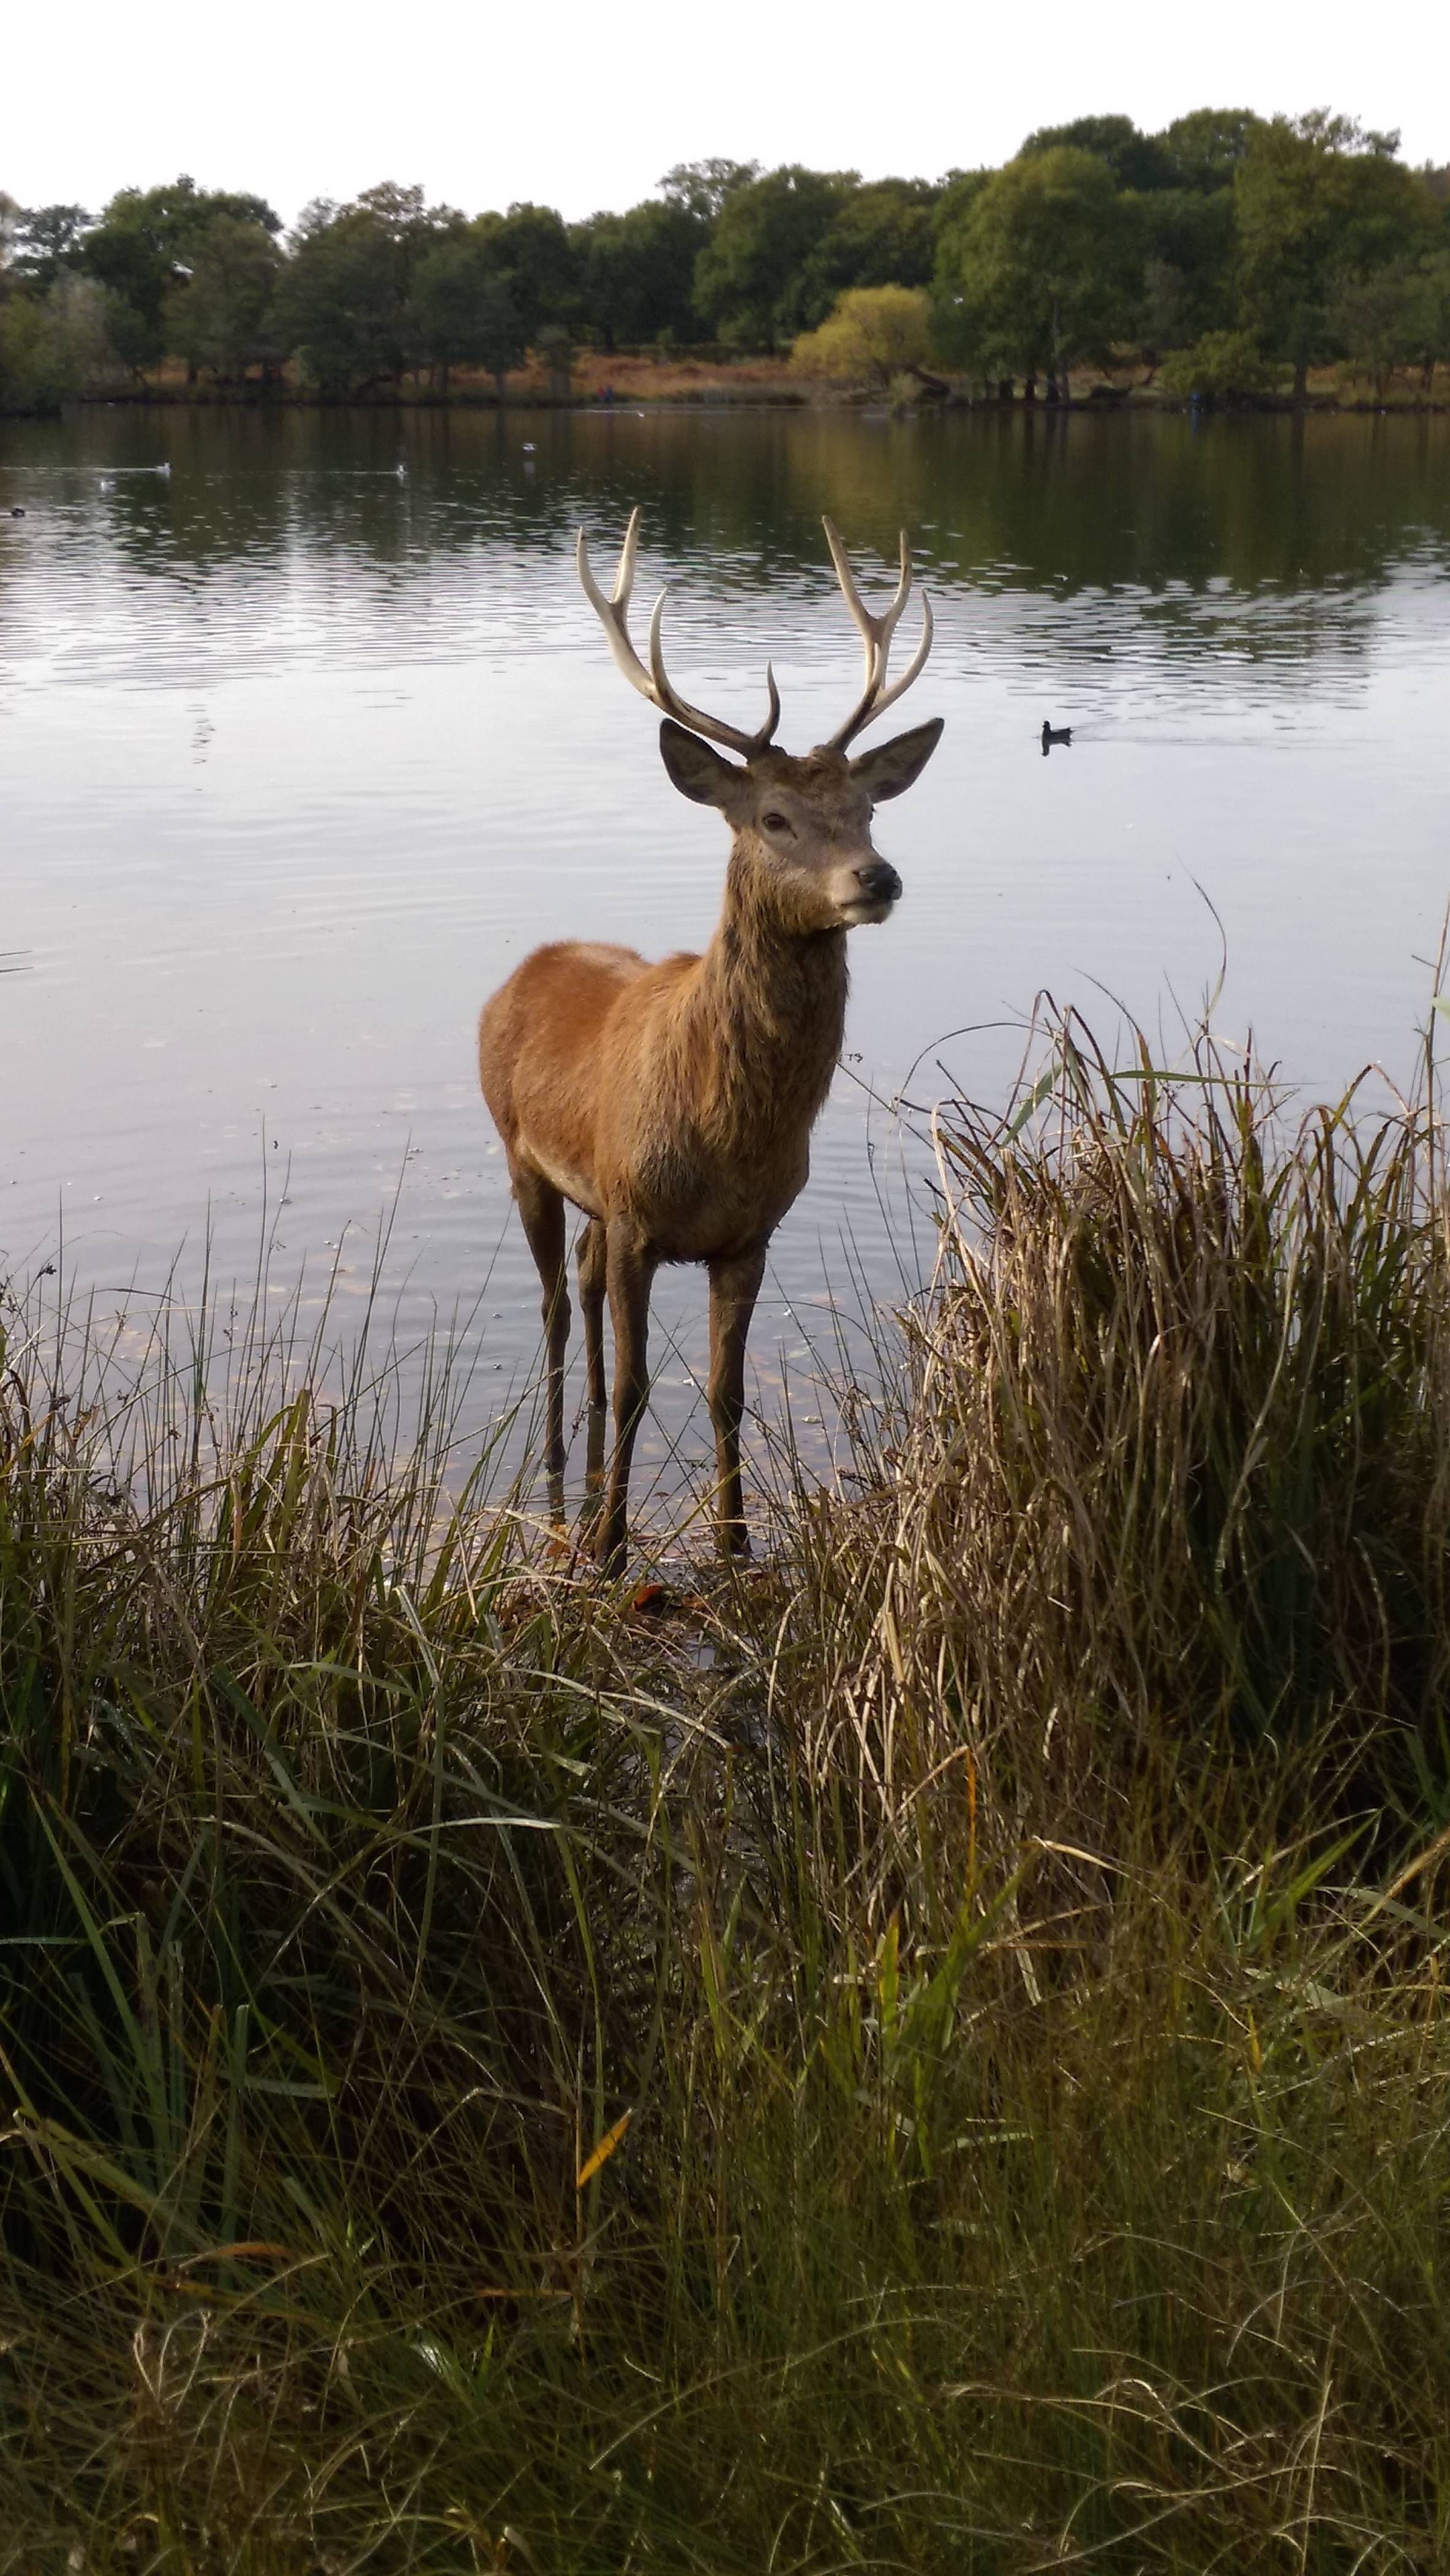 I took this photo of a deer and wanted to share it with someone